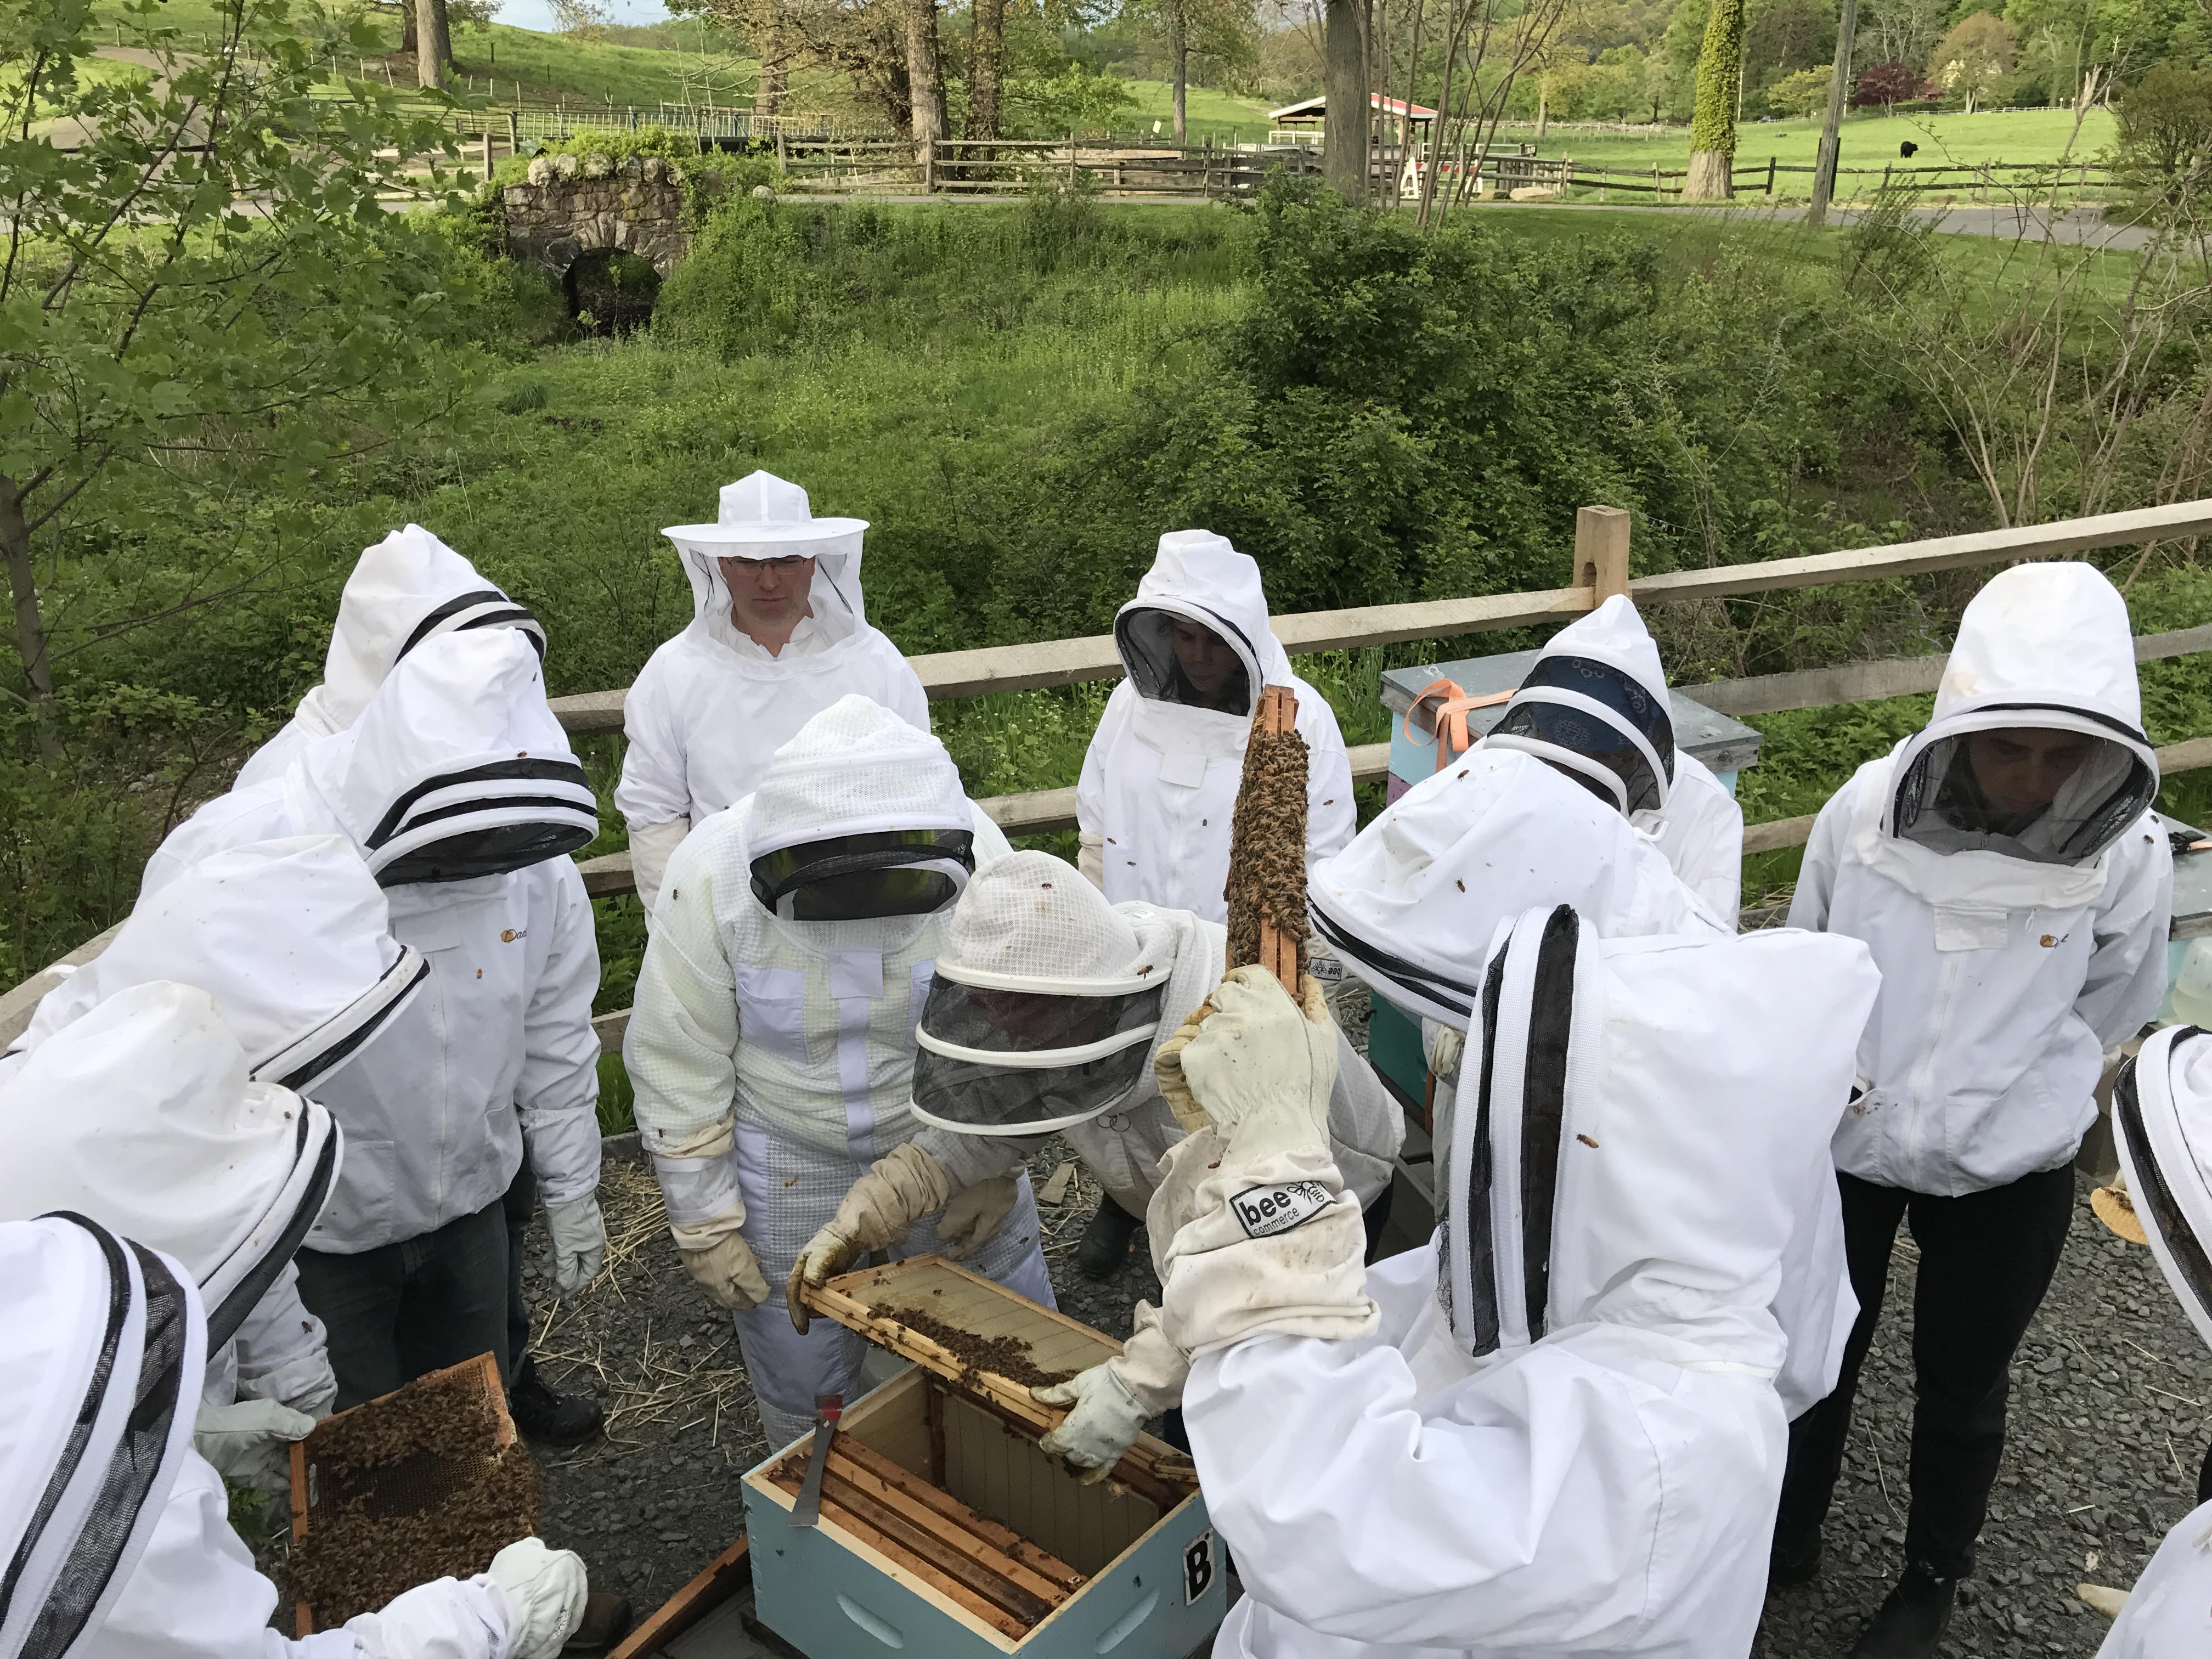 Beekeeping School 2020 - Stone Barns Center for Food and Agriculture